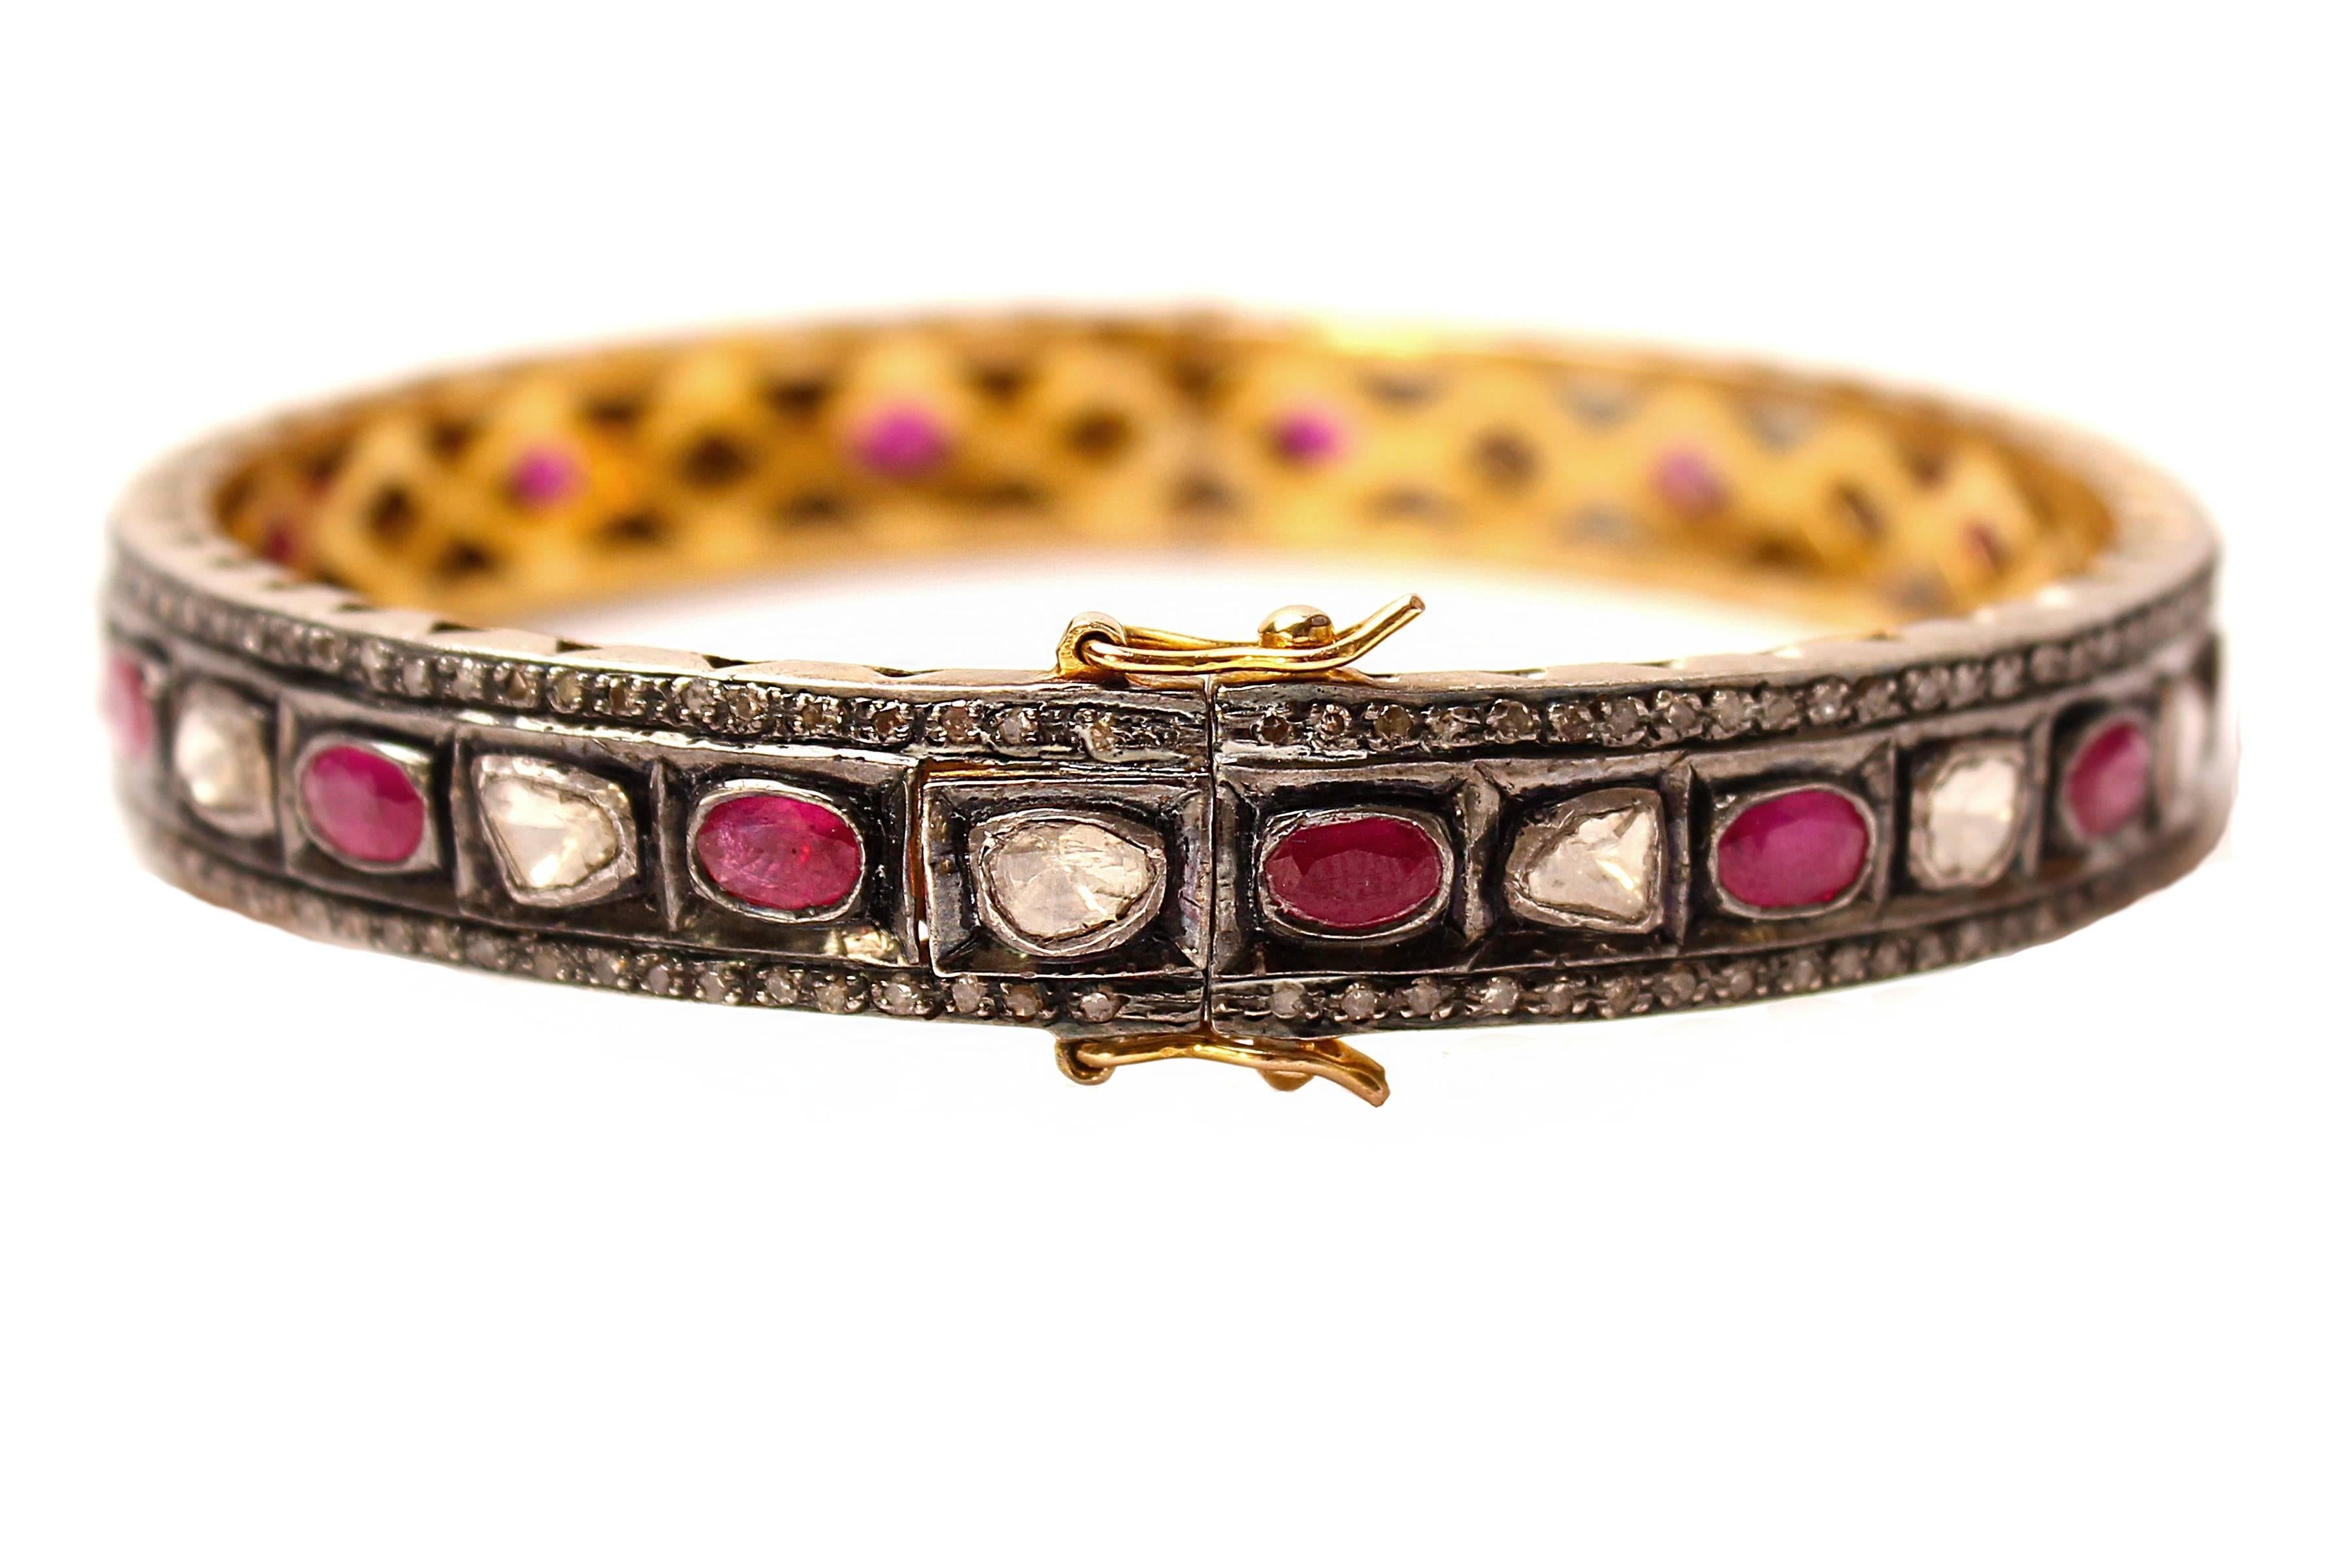 Rosecut diamonds and rubies. Silver. Gold plate. Clasp.